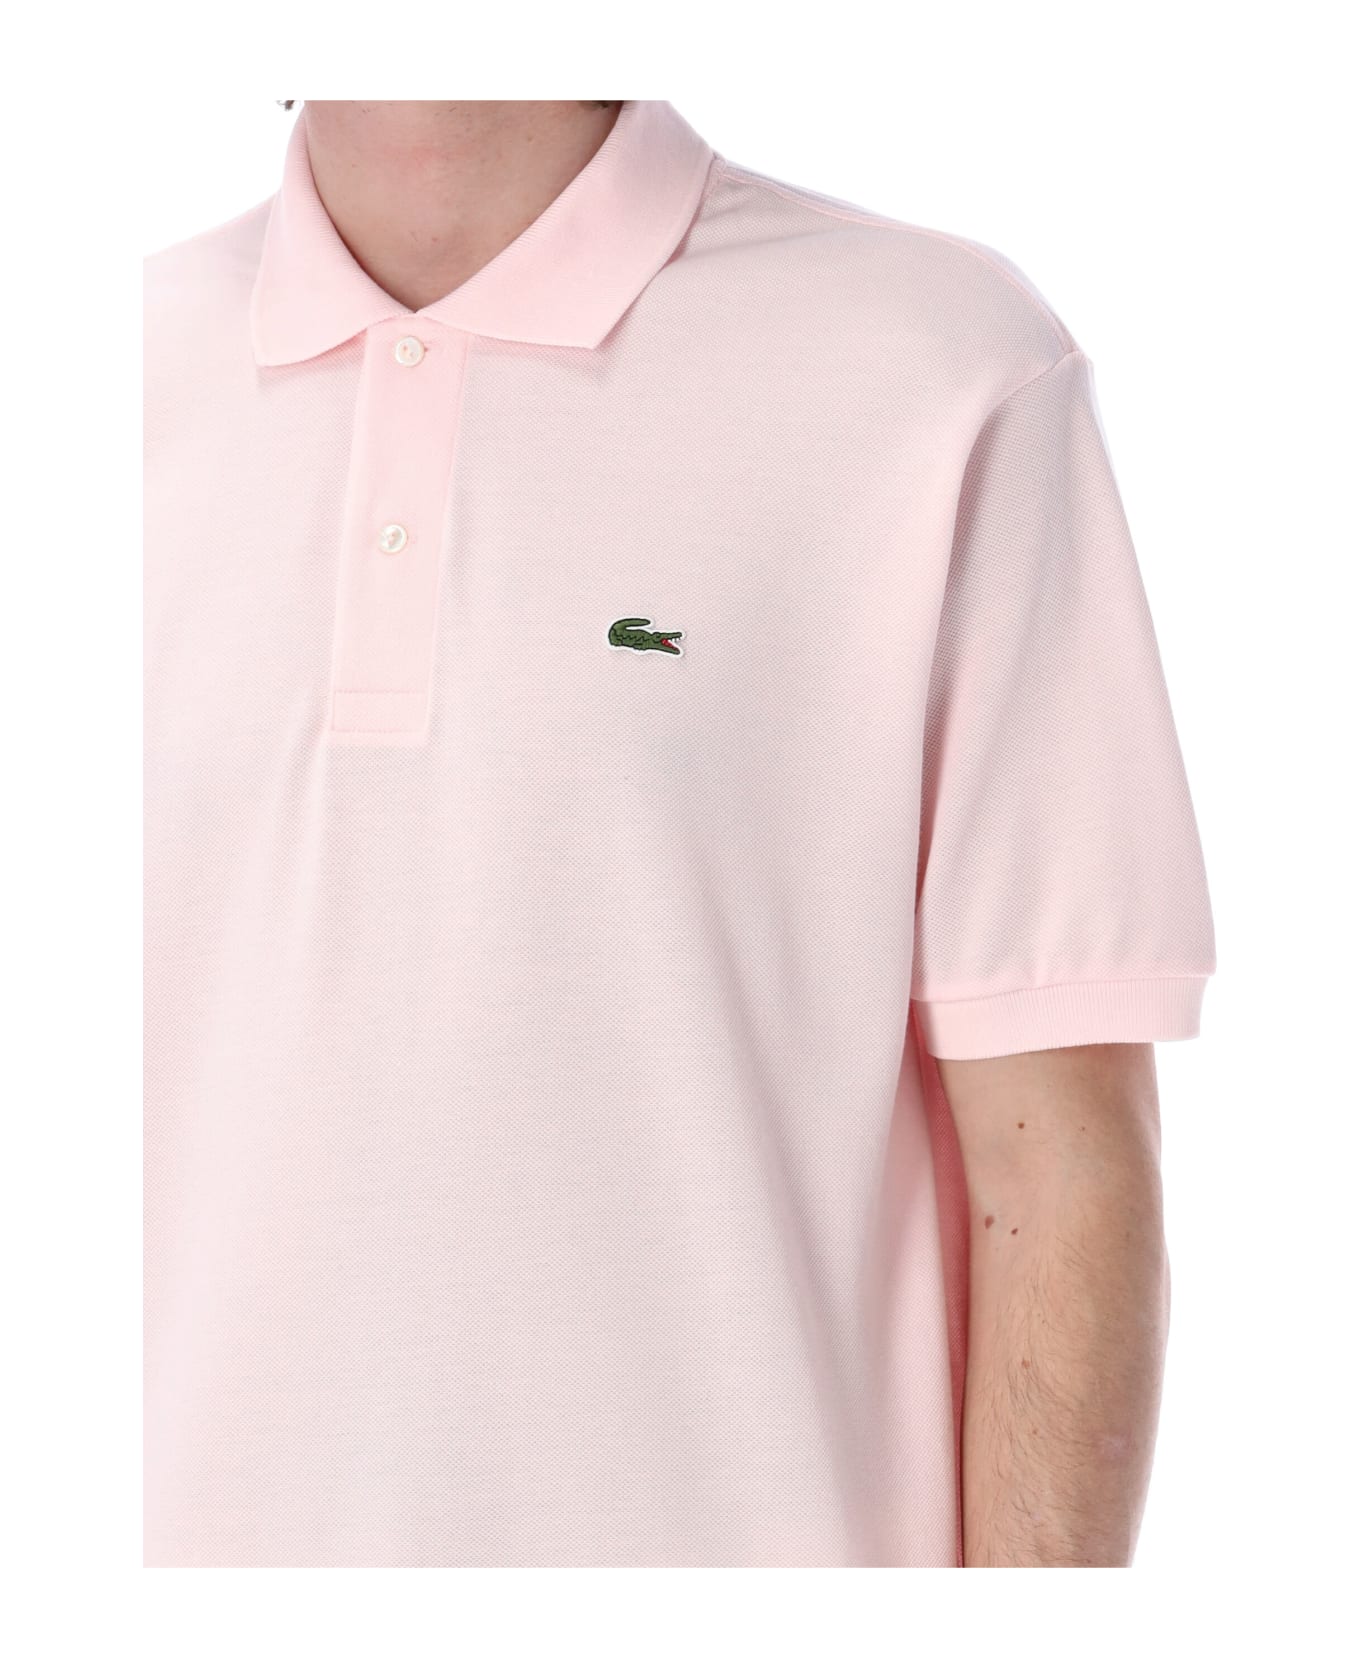 Lacoste Classic Fit Polo Shirt - PINK